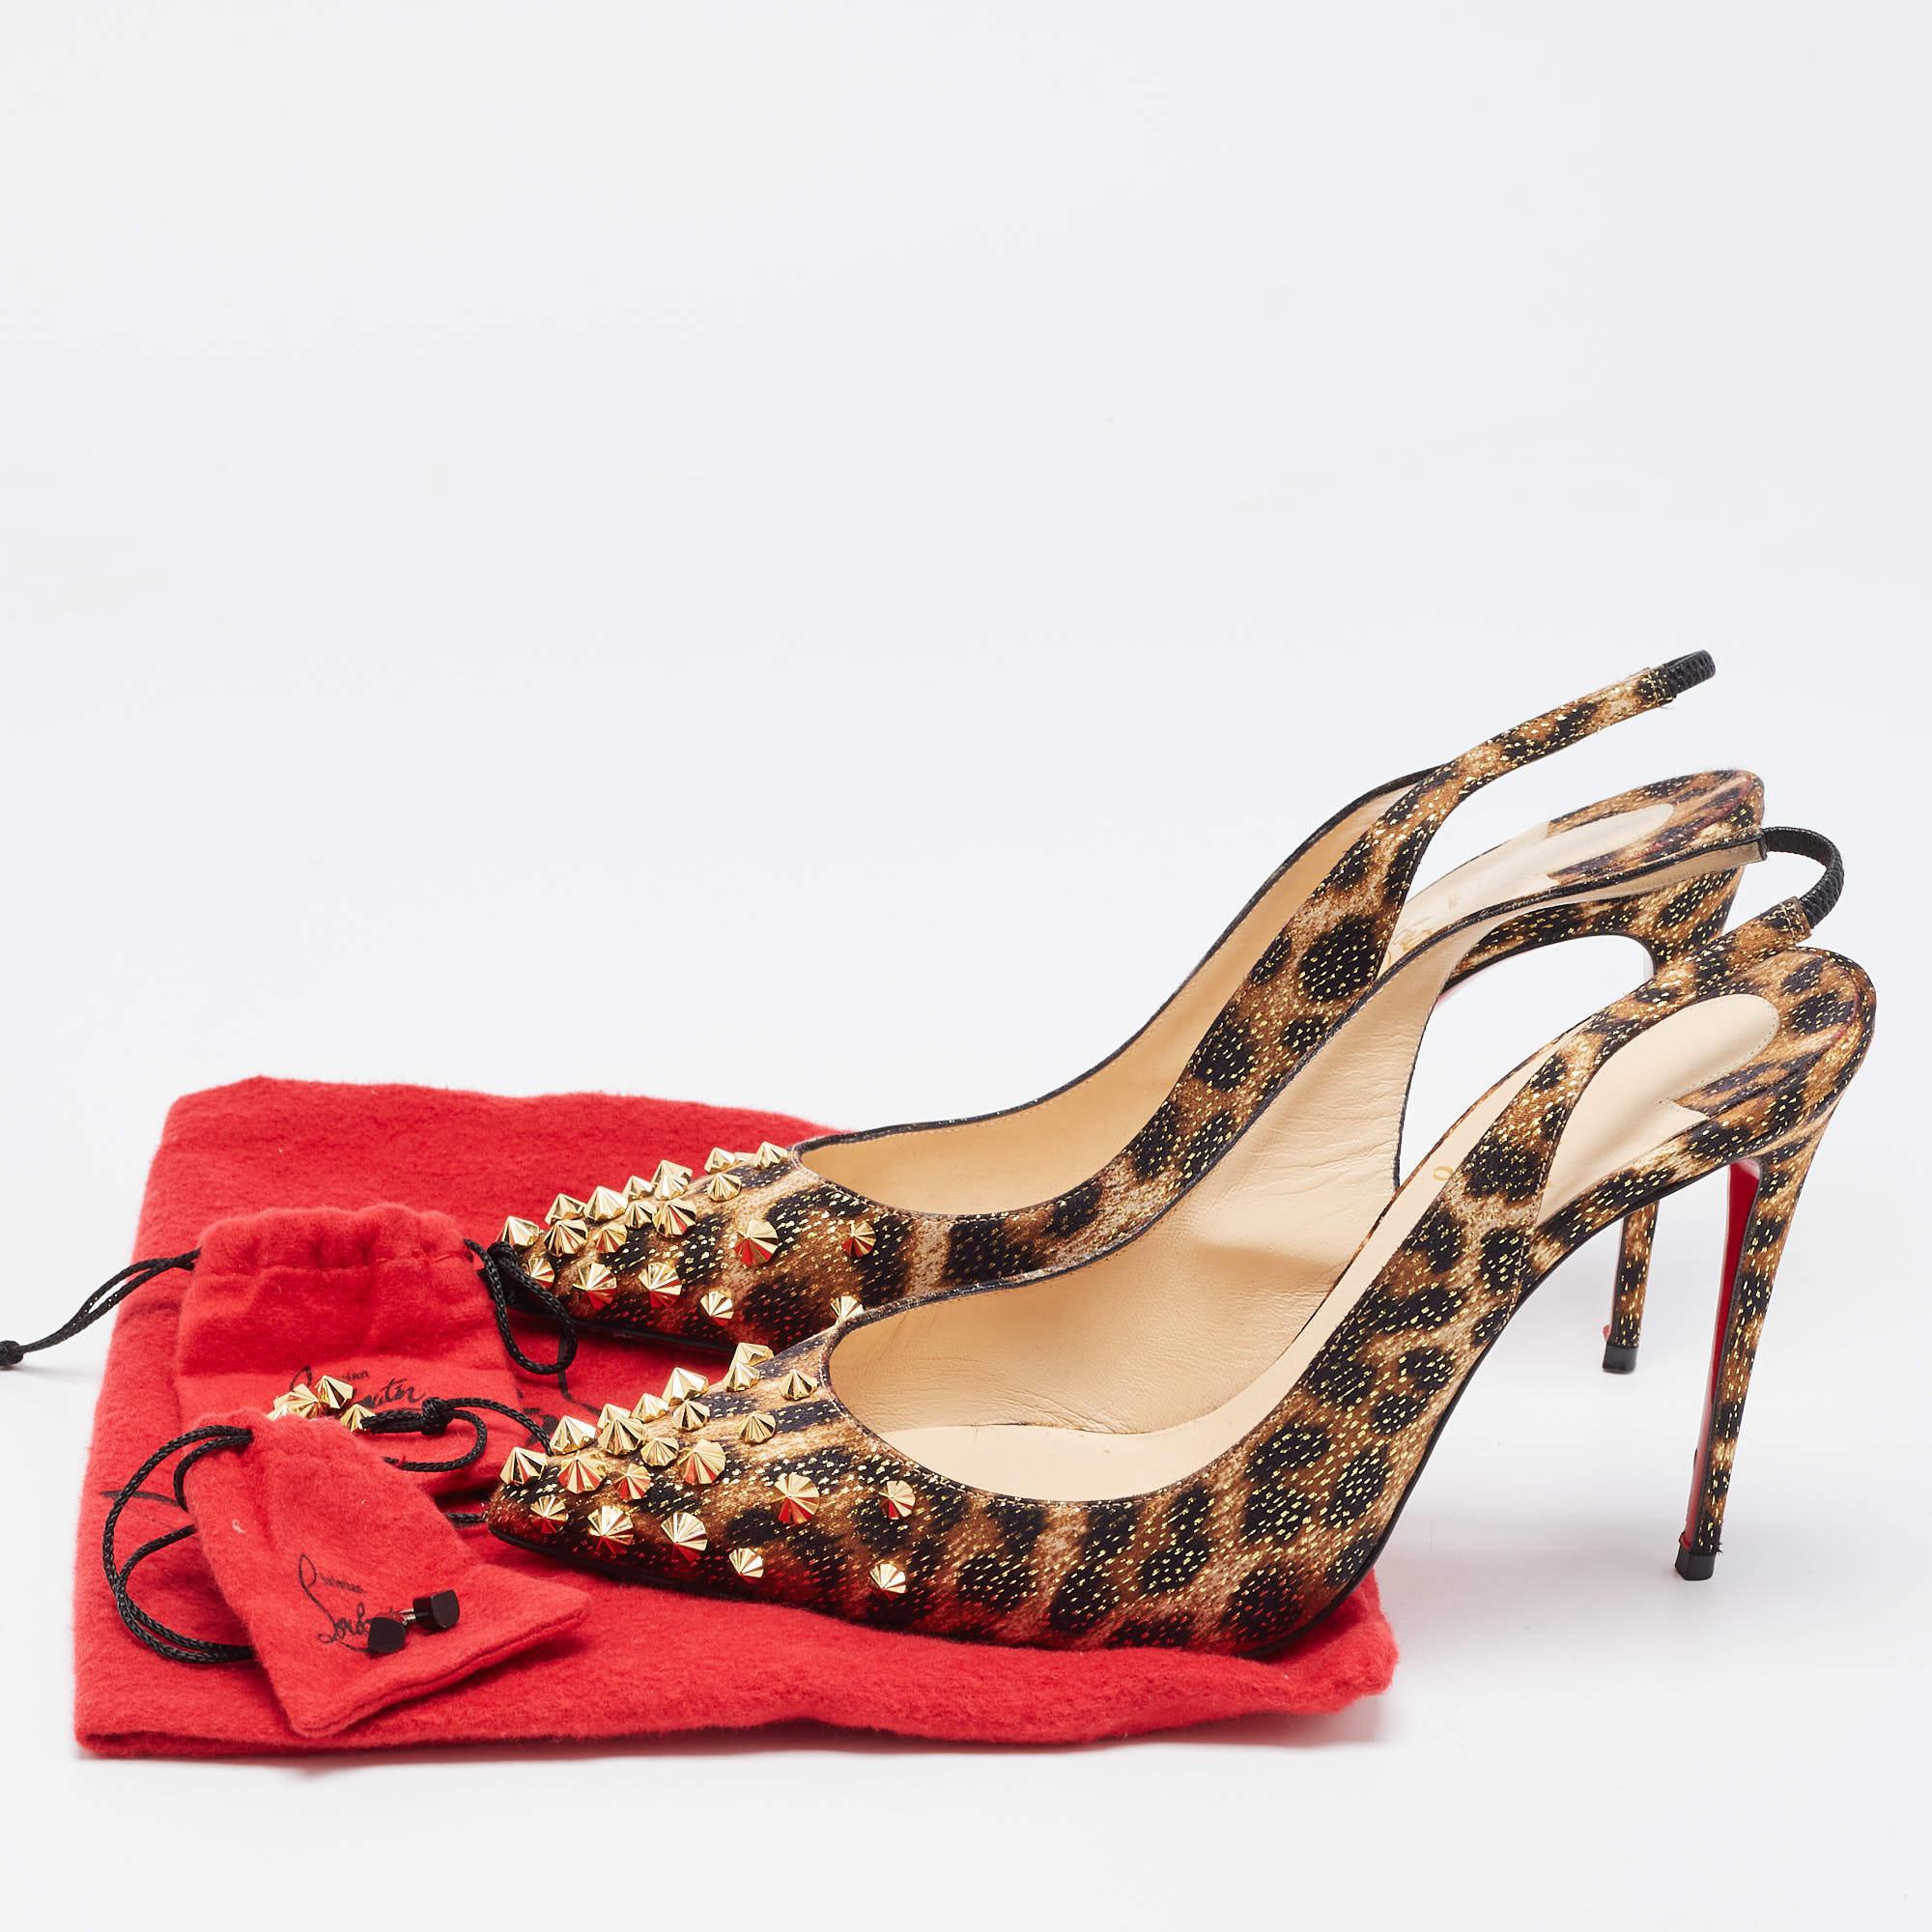 Christian Louboutin Tricolor Leopard Print Satin Spiked Drama Slingback Pumps Si For Sale 5